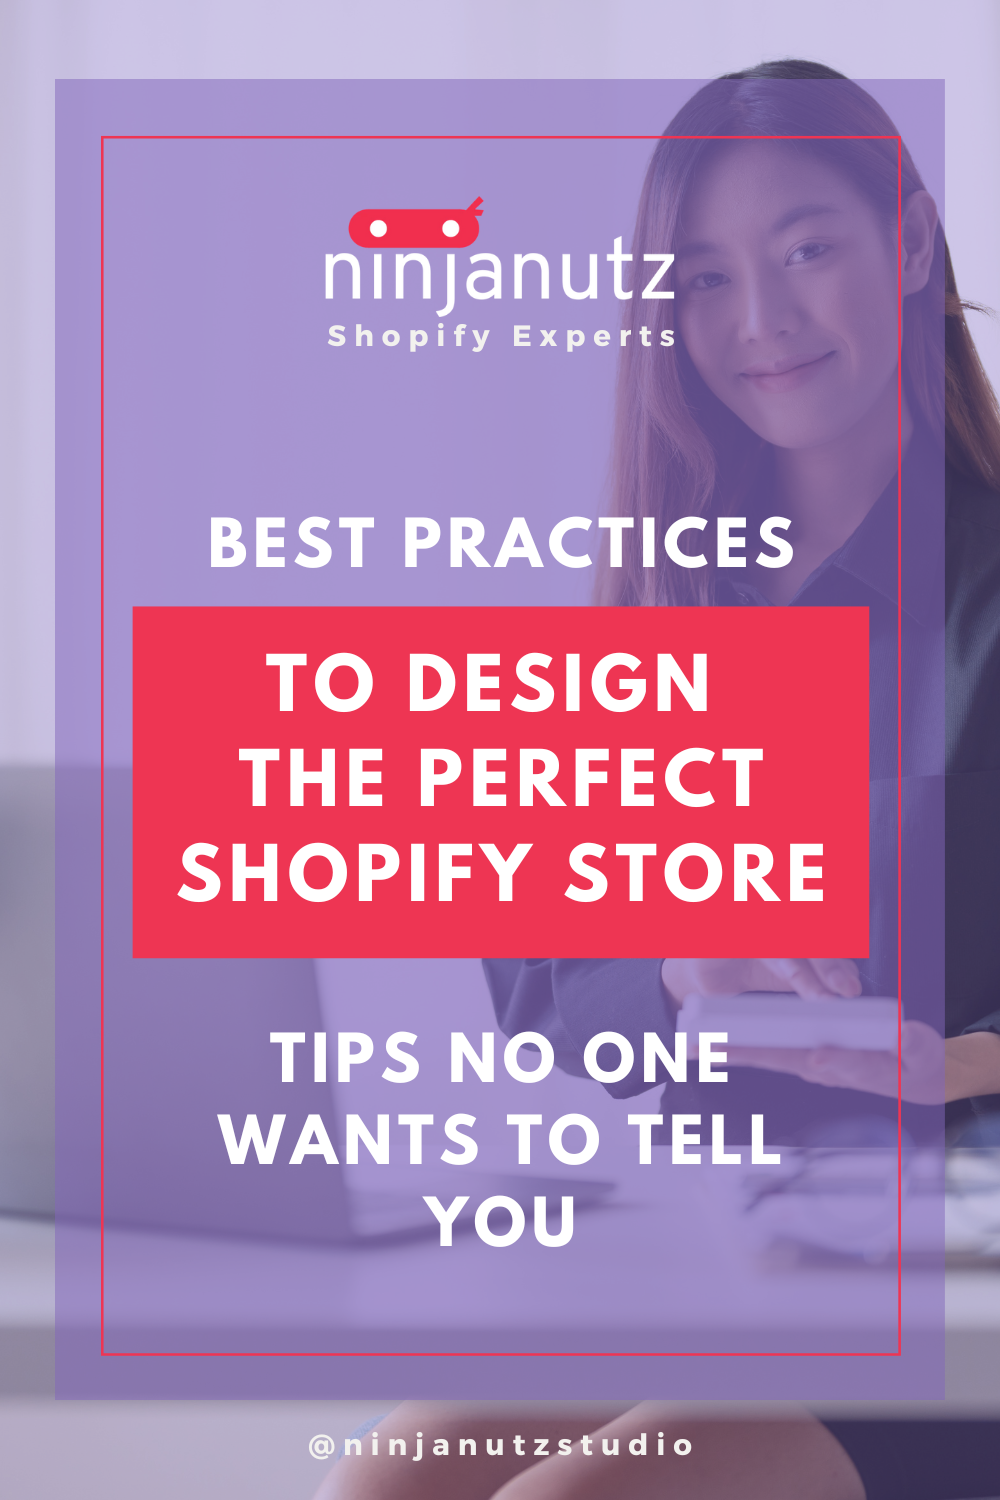 Best Practices to Design the Perfect Shopify Store - Tips No One Wants to Tell You NinjaNutz®